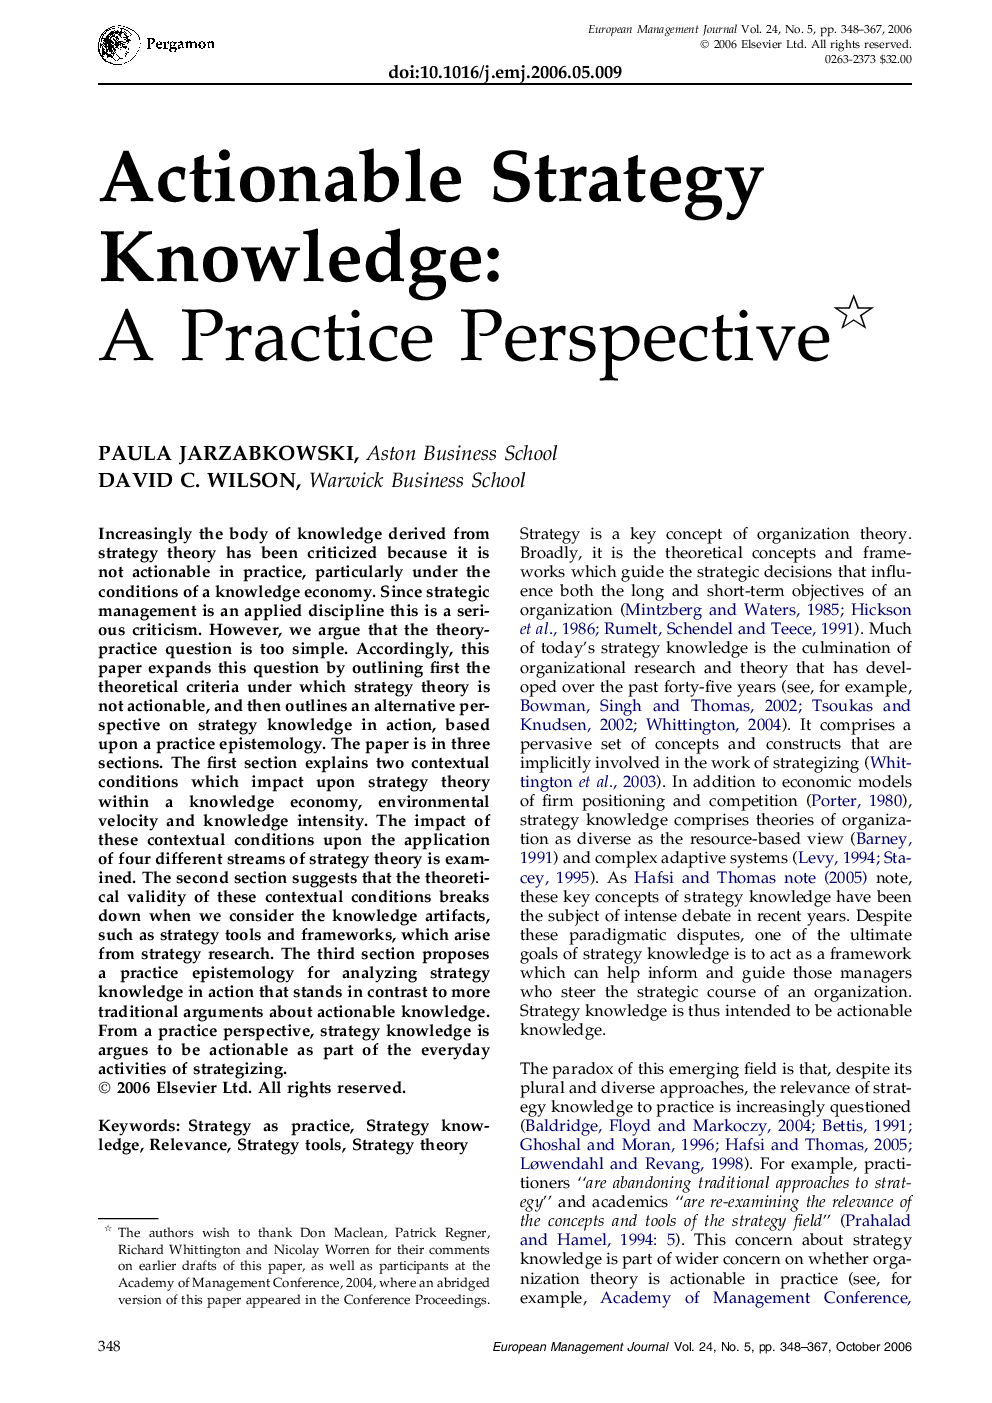 Actionable Strategy Knowledge: : A Practice Perspective